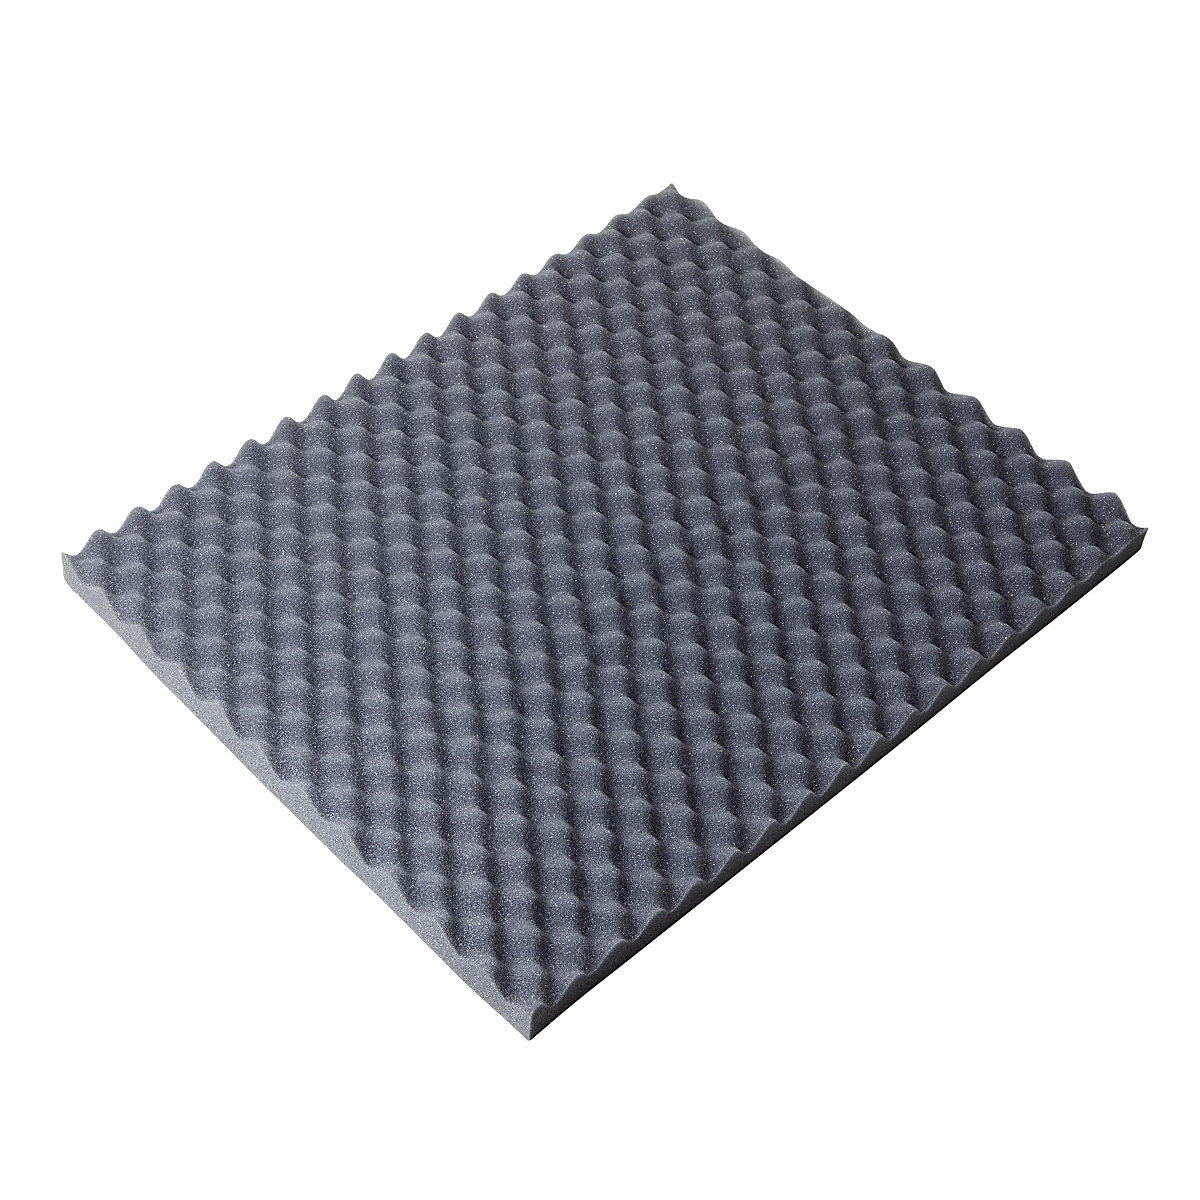 Egg crate foam sheet, 30 mm thick, LxW 600 x 400 mm, pack of 26-1